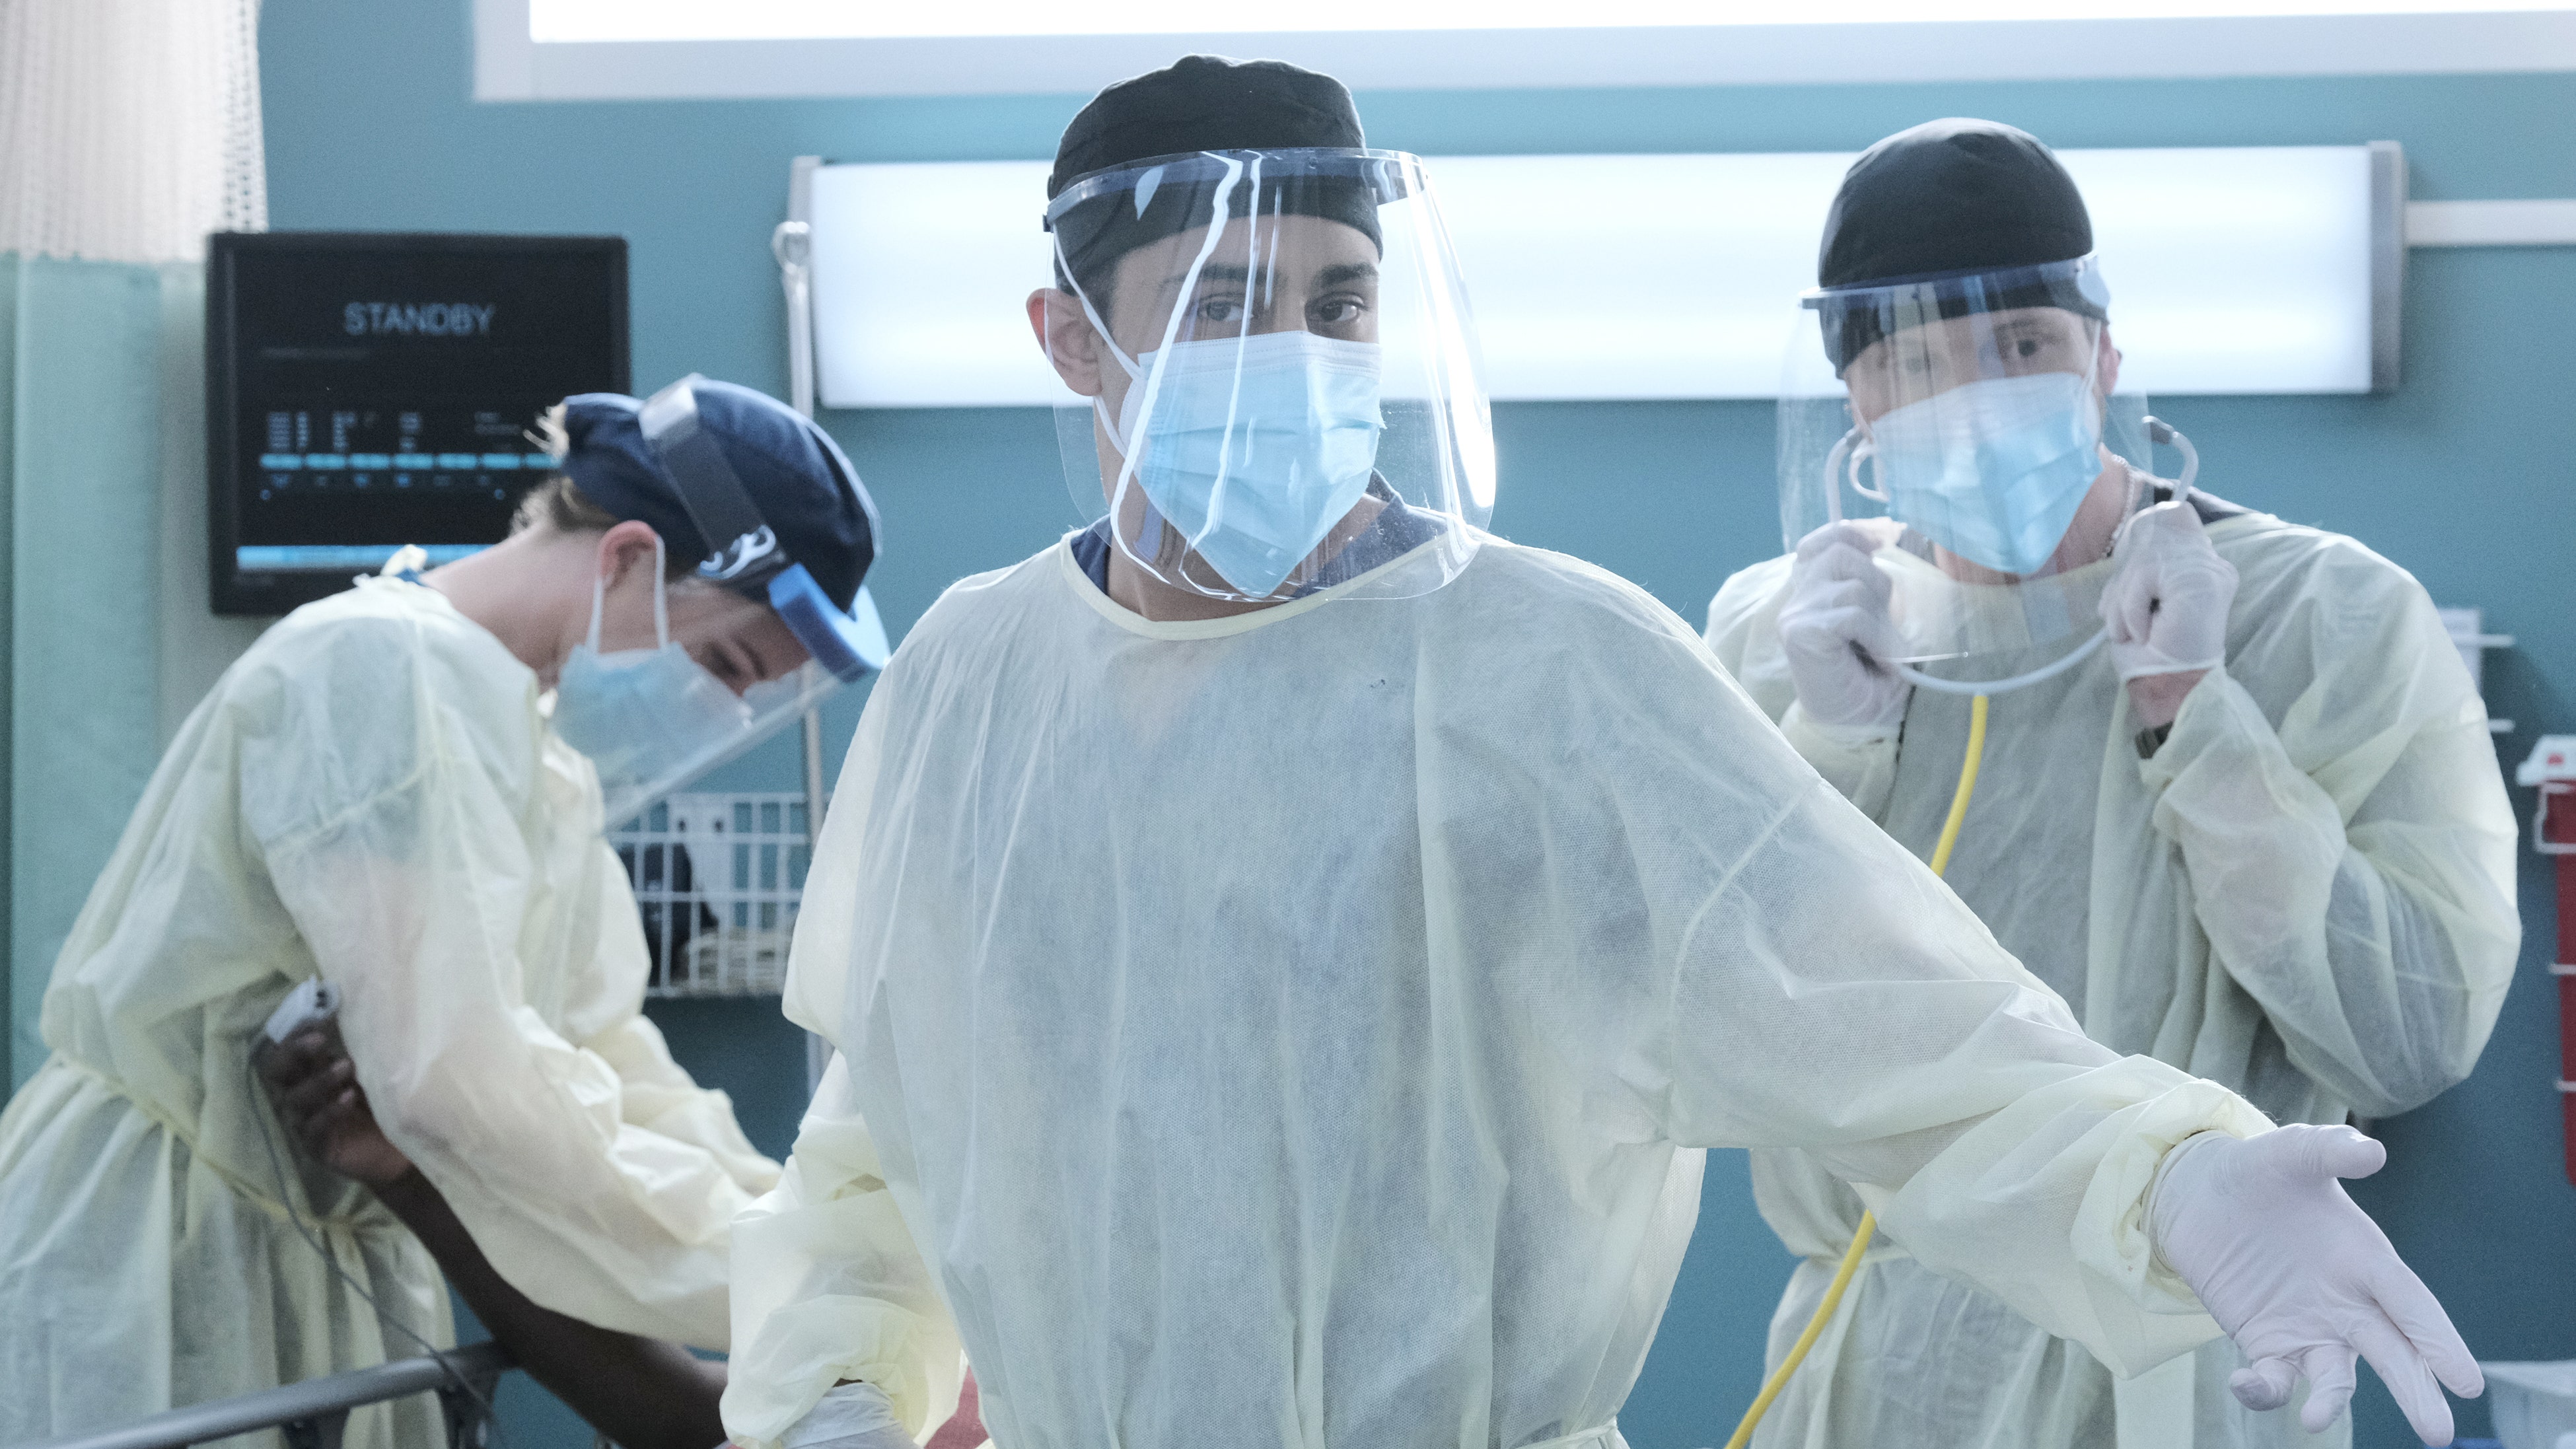 ‘The Resident’ confronts toll of pandemic on health care workers